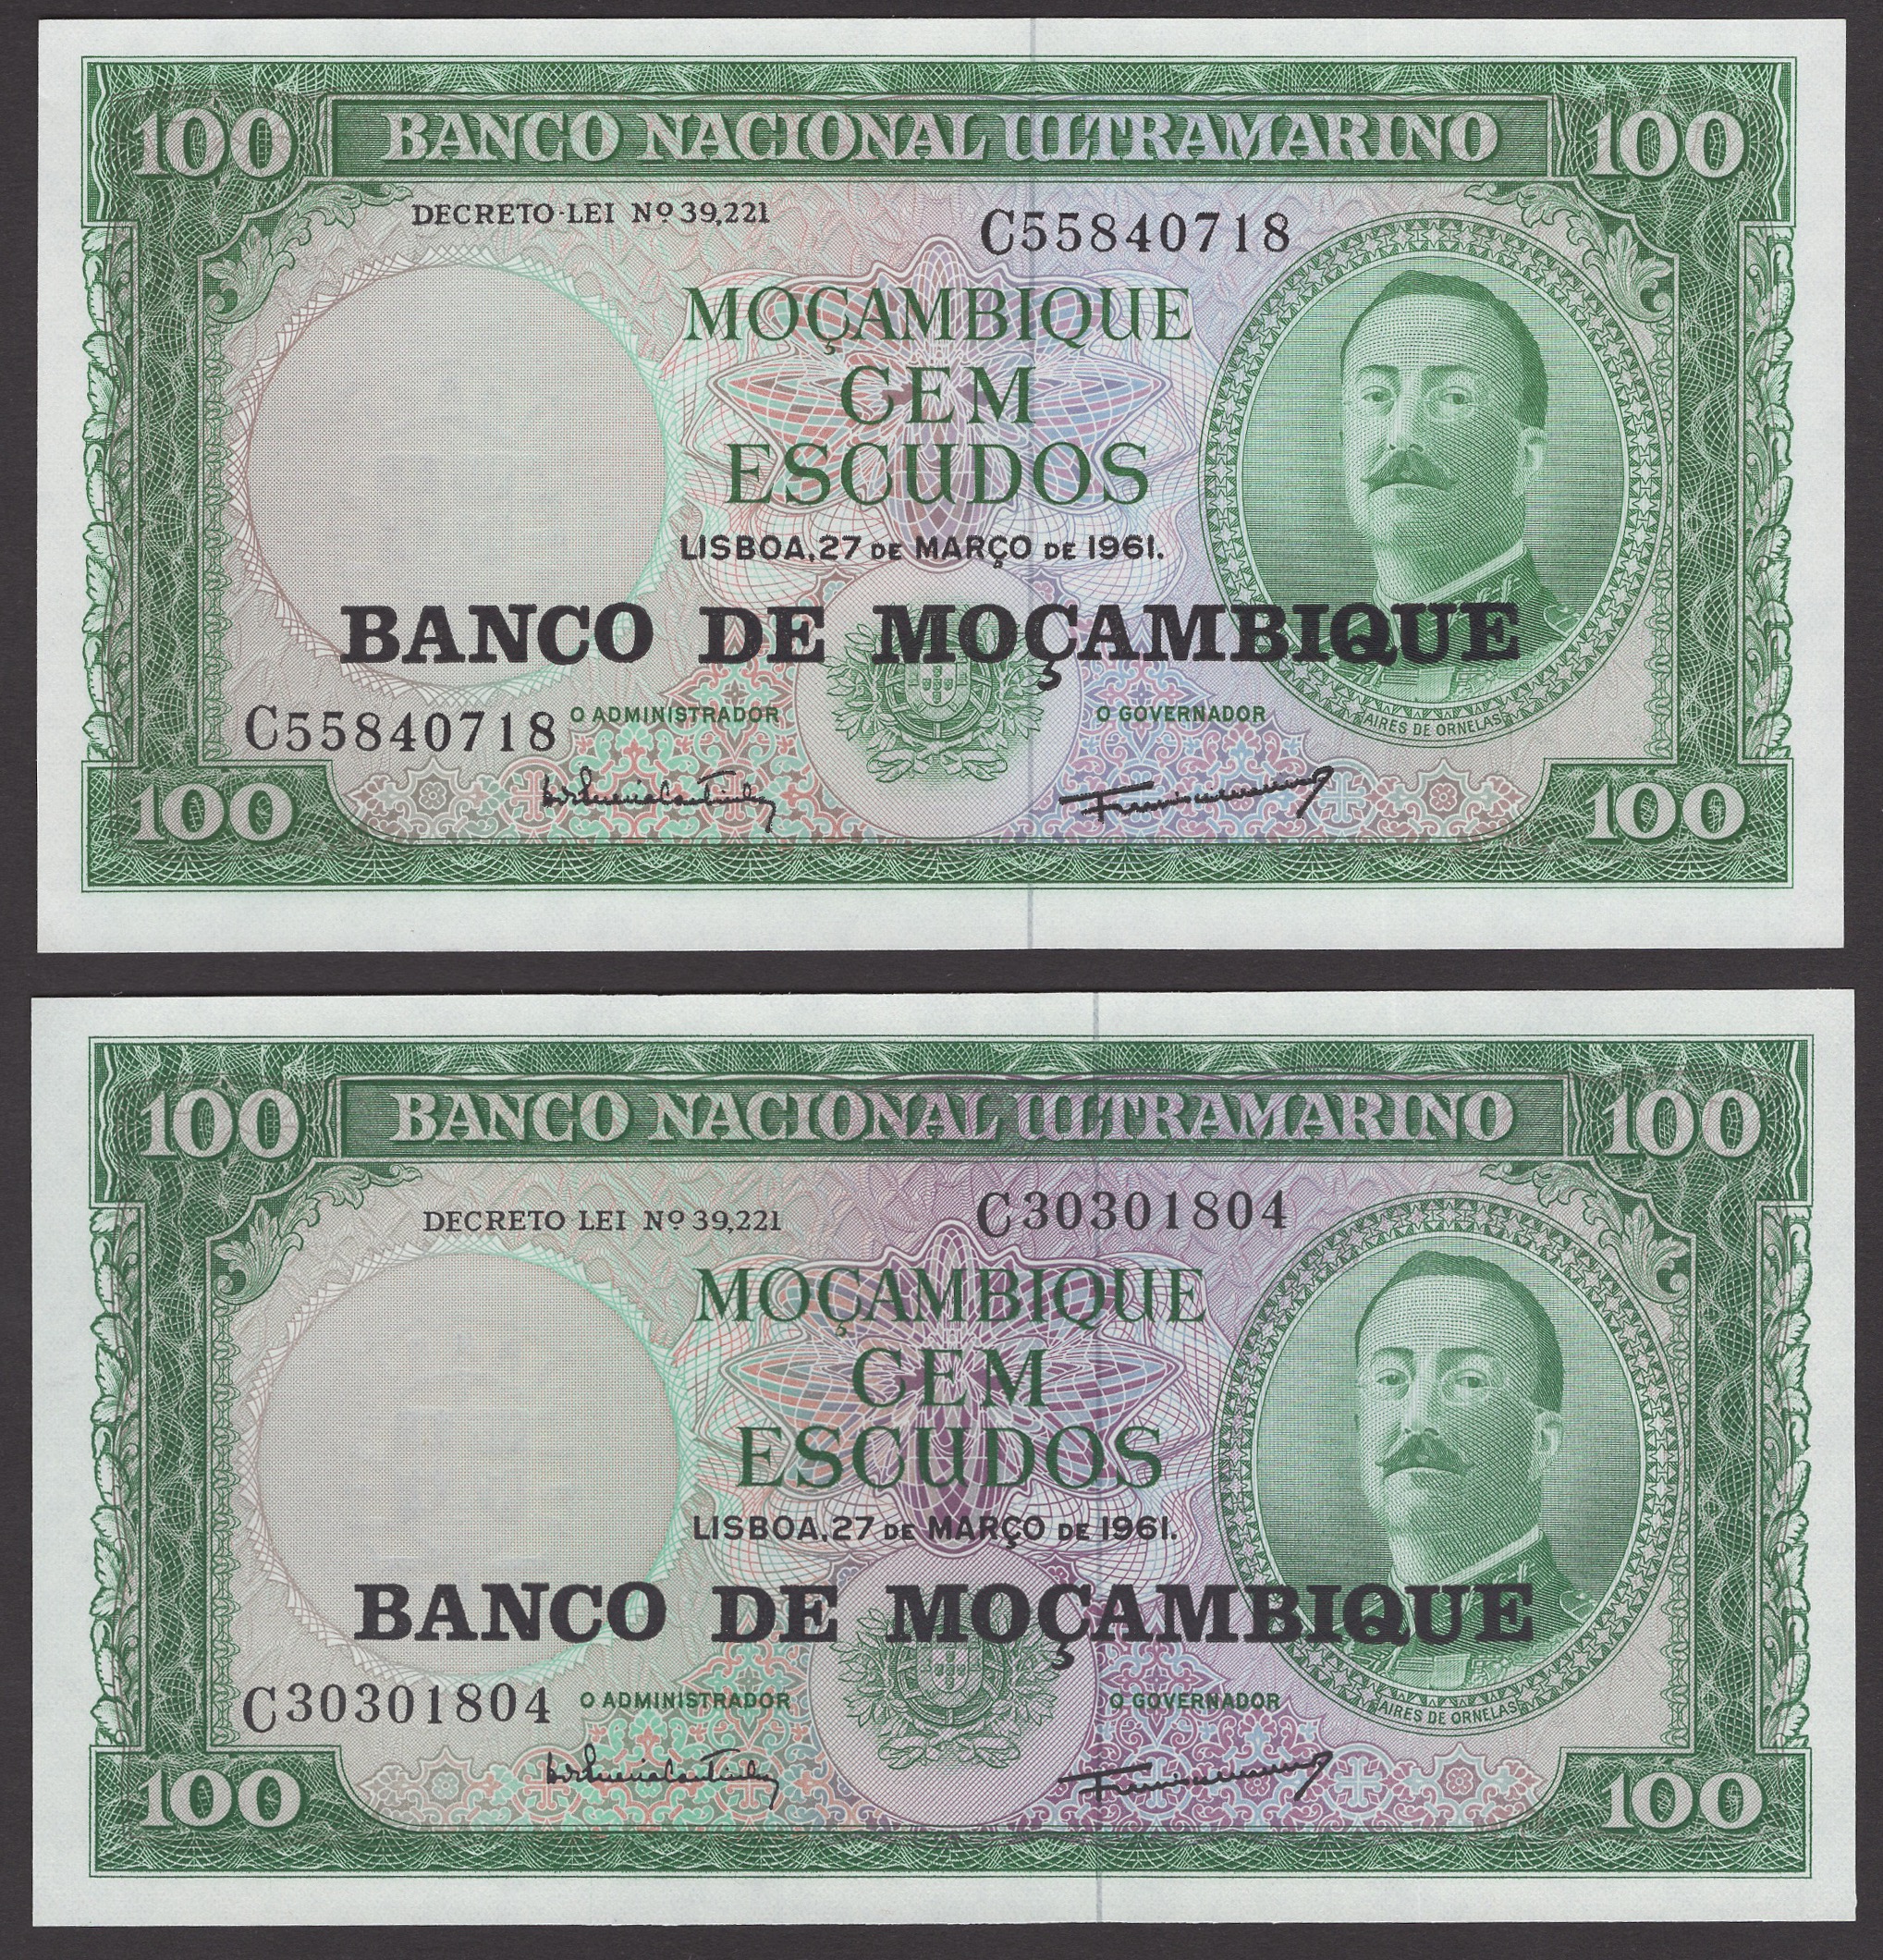 Banco de Mocambique, a remarkable full range of specimens and proofs for the overprinted... - Image 5 of 8